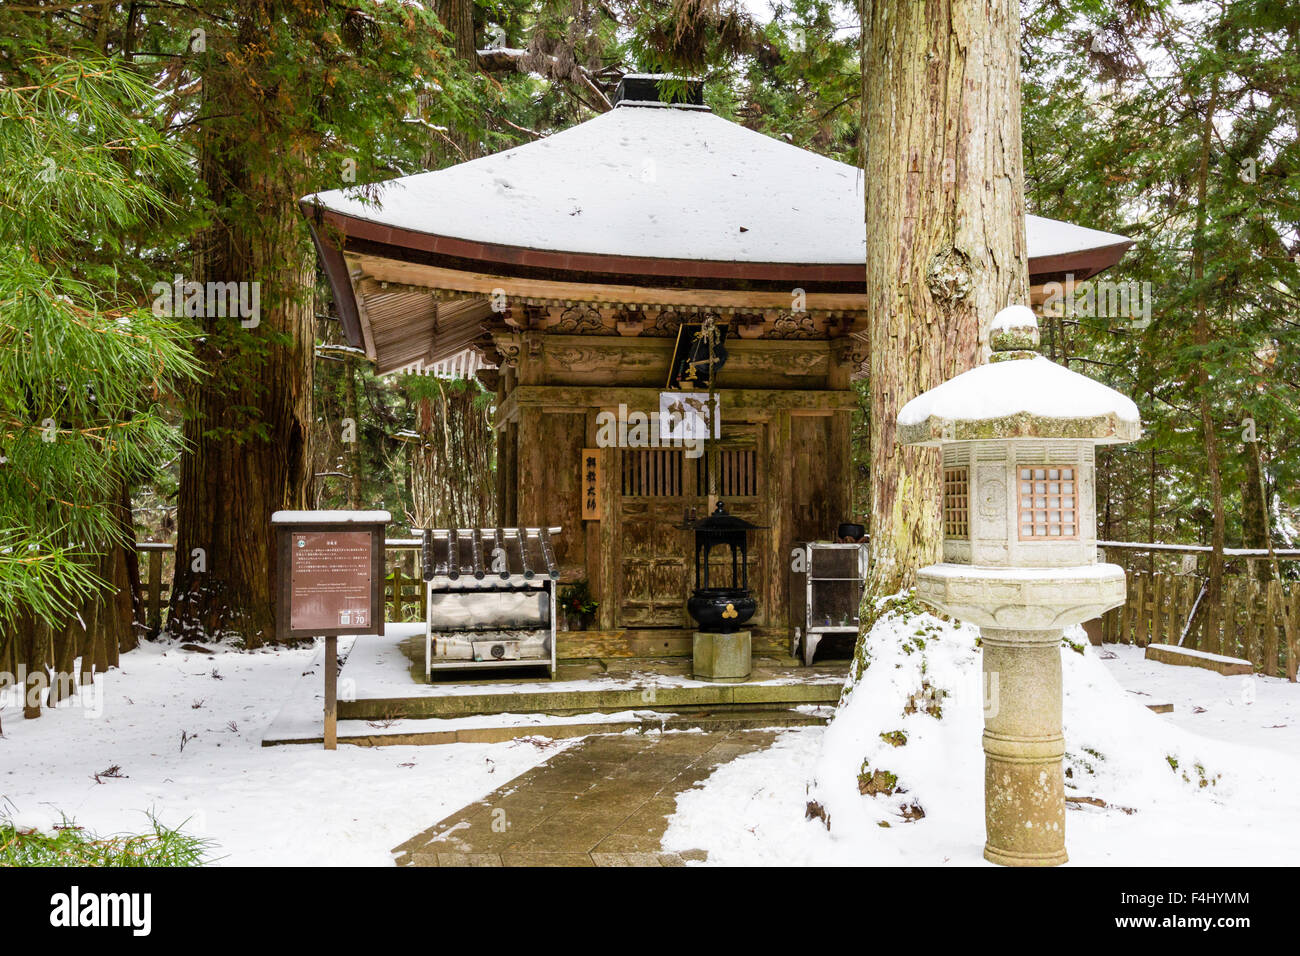 Koyasan, Japan, Okunoin cemetery, Japan's largest. Snow covered wooden mausoleum tomb of Mitsugon kakuban, founded of the Shingon Sect of Buddhism. Stock Photo